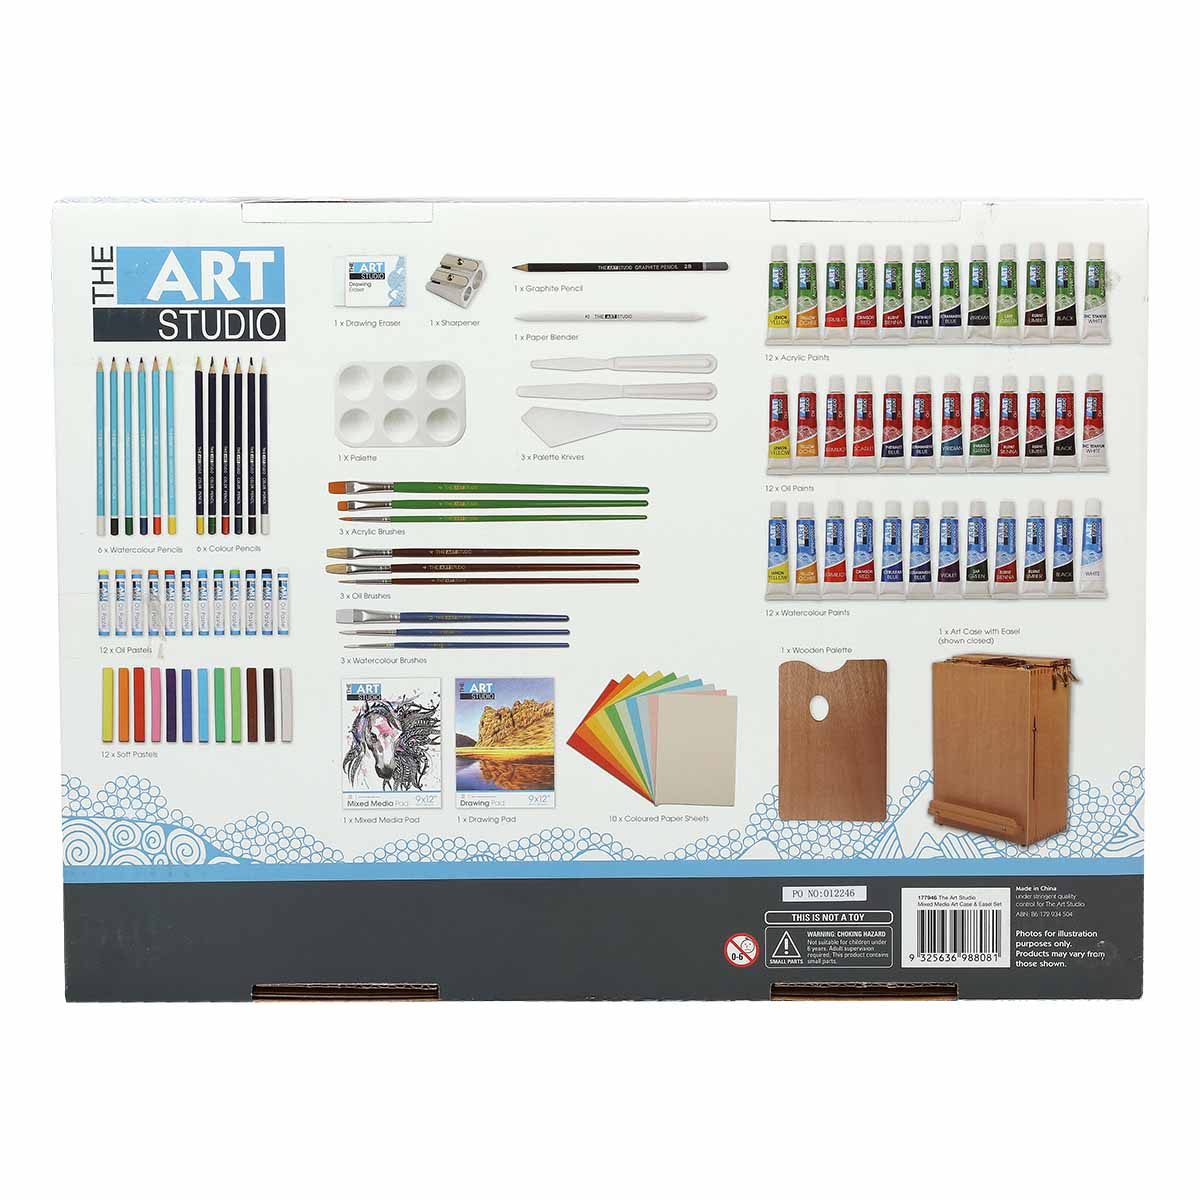 https://www.shopriot.shop/wp-content/uploads/1689/35/the-art-studio-mixed-media-art-case-easel-set-103-pieces-567-shop-the-newest-collection-now_7.jpg